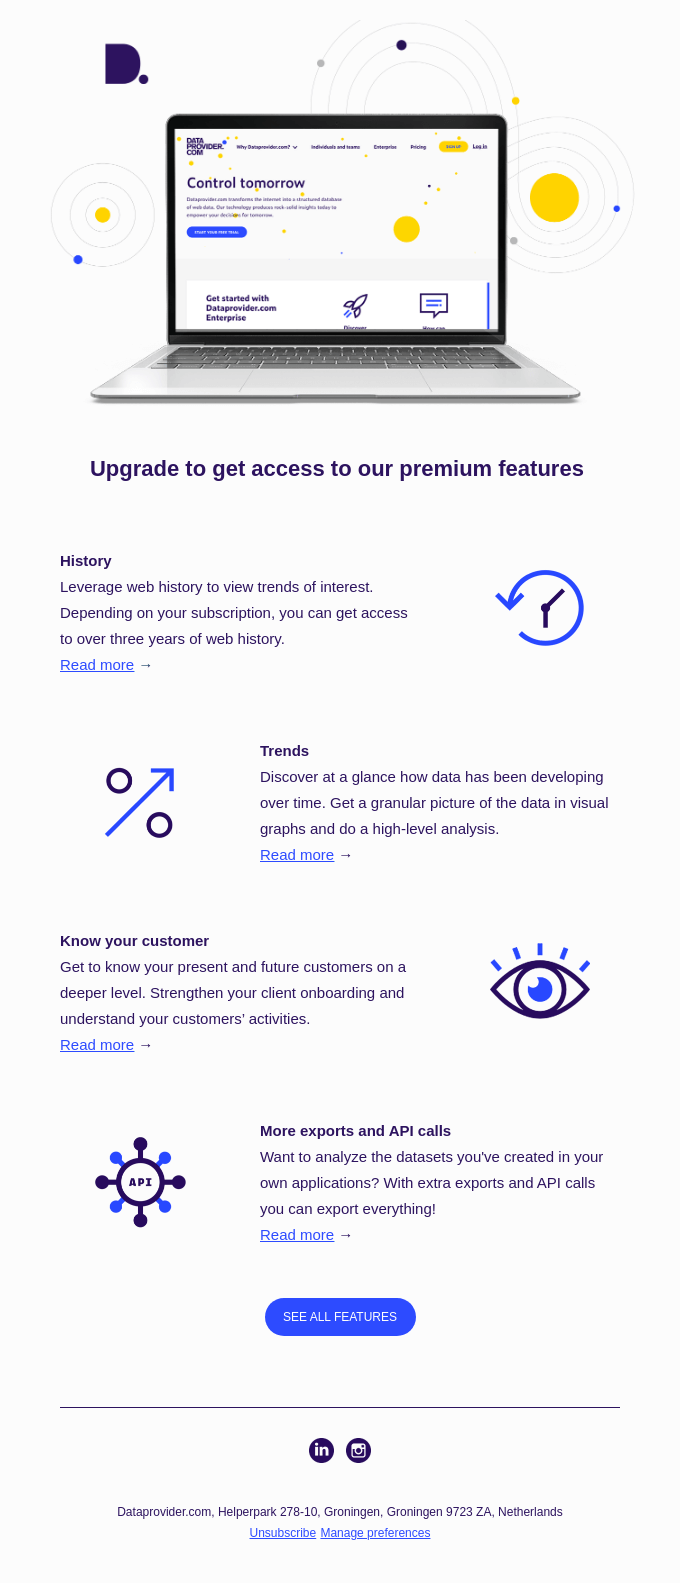 Get access to our premium features 